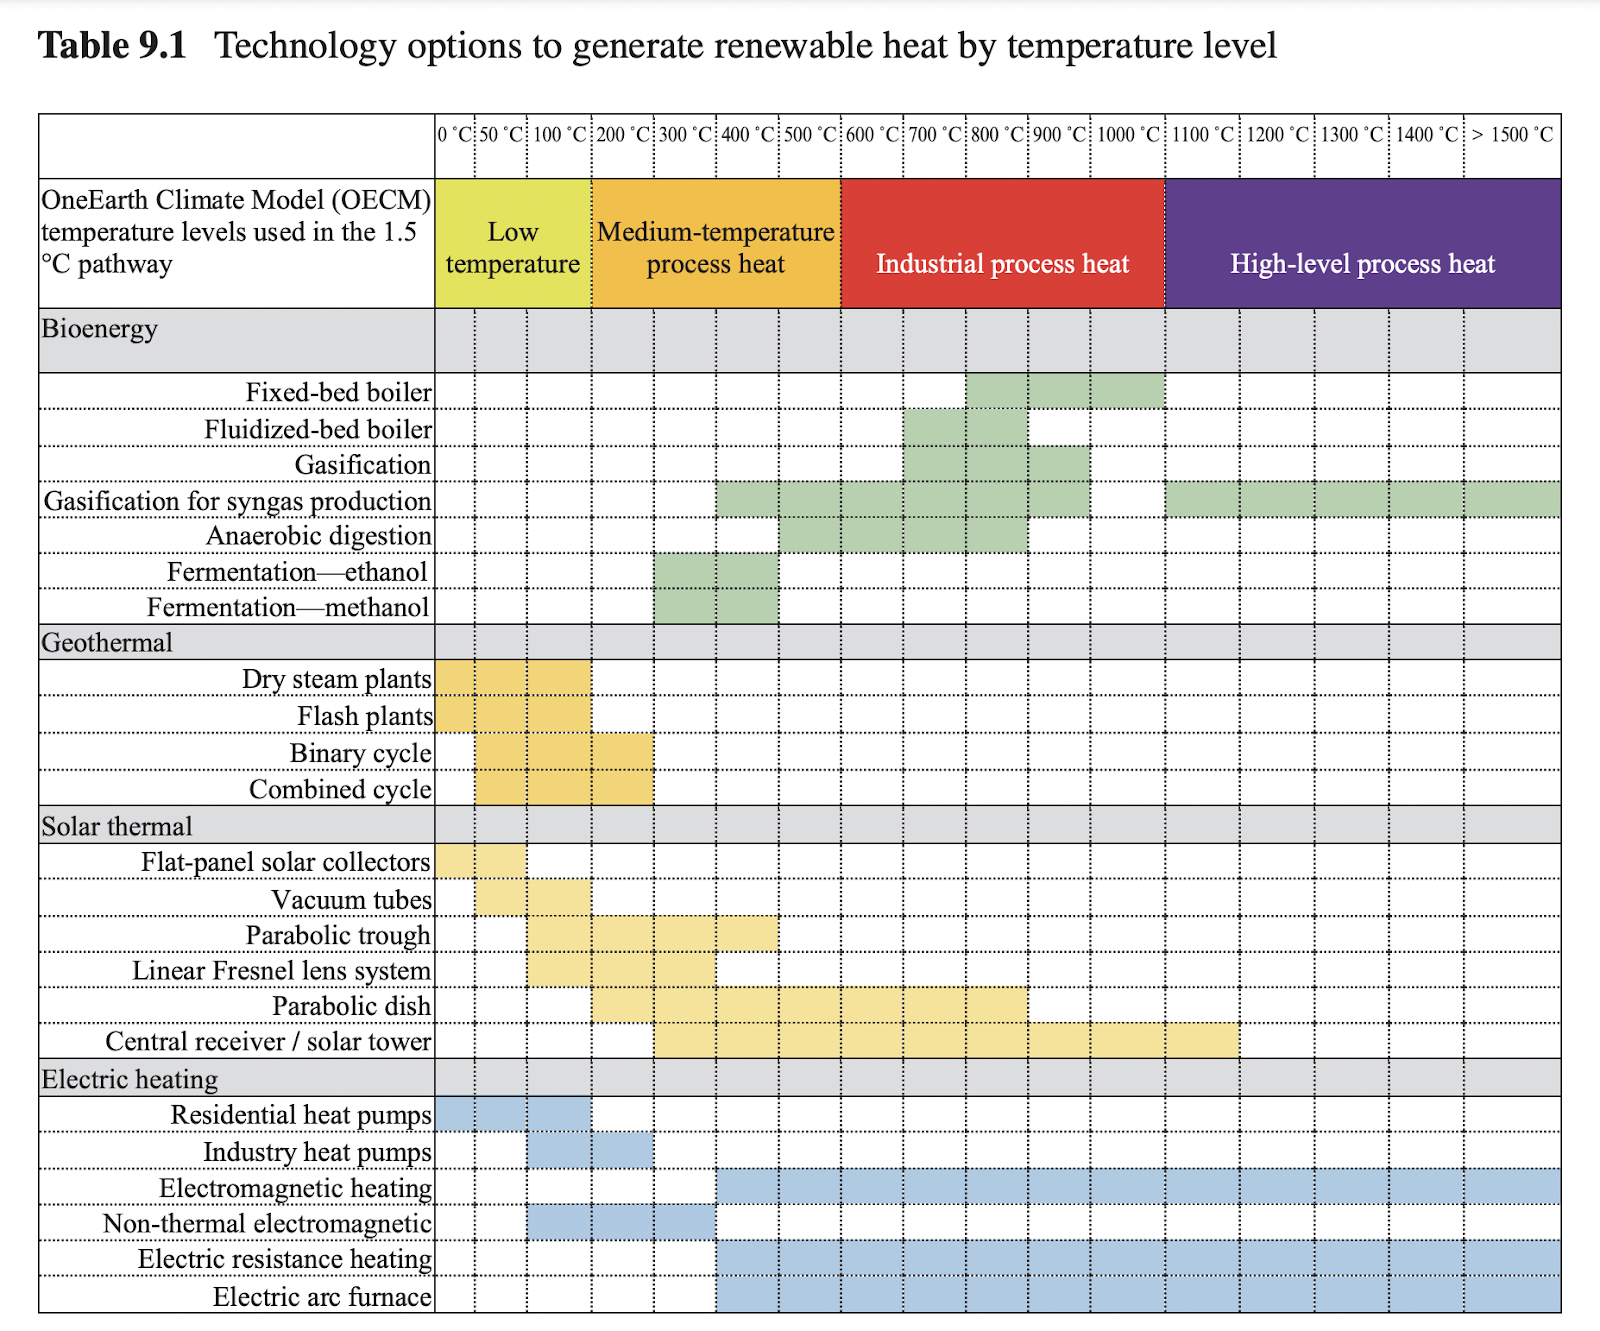 Technology options to generate renewable heat by temperature level.